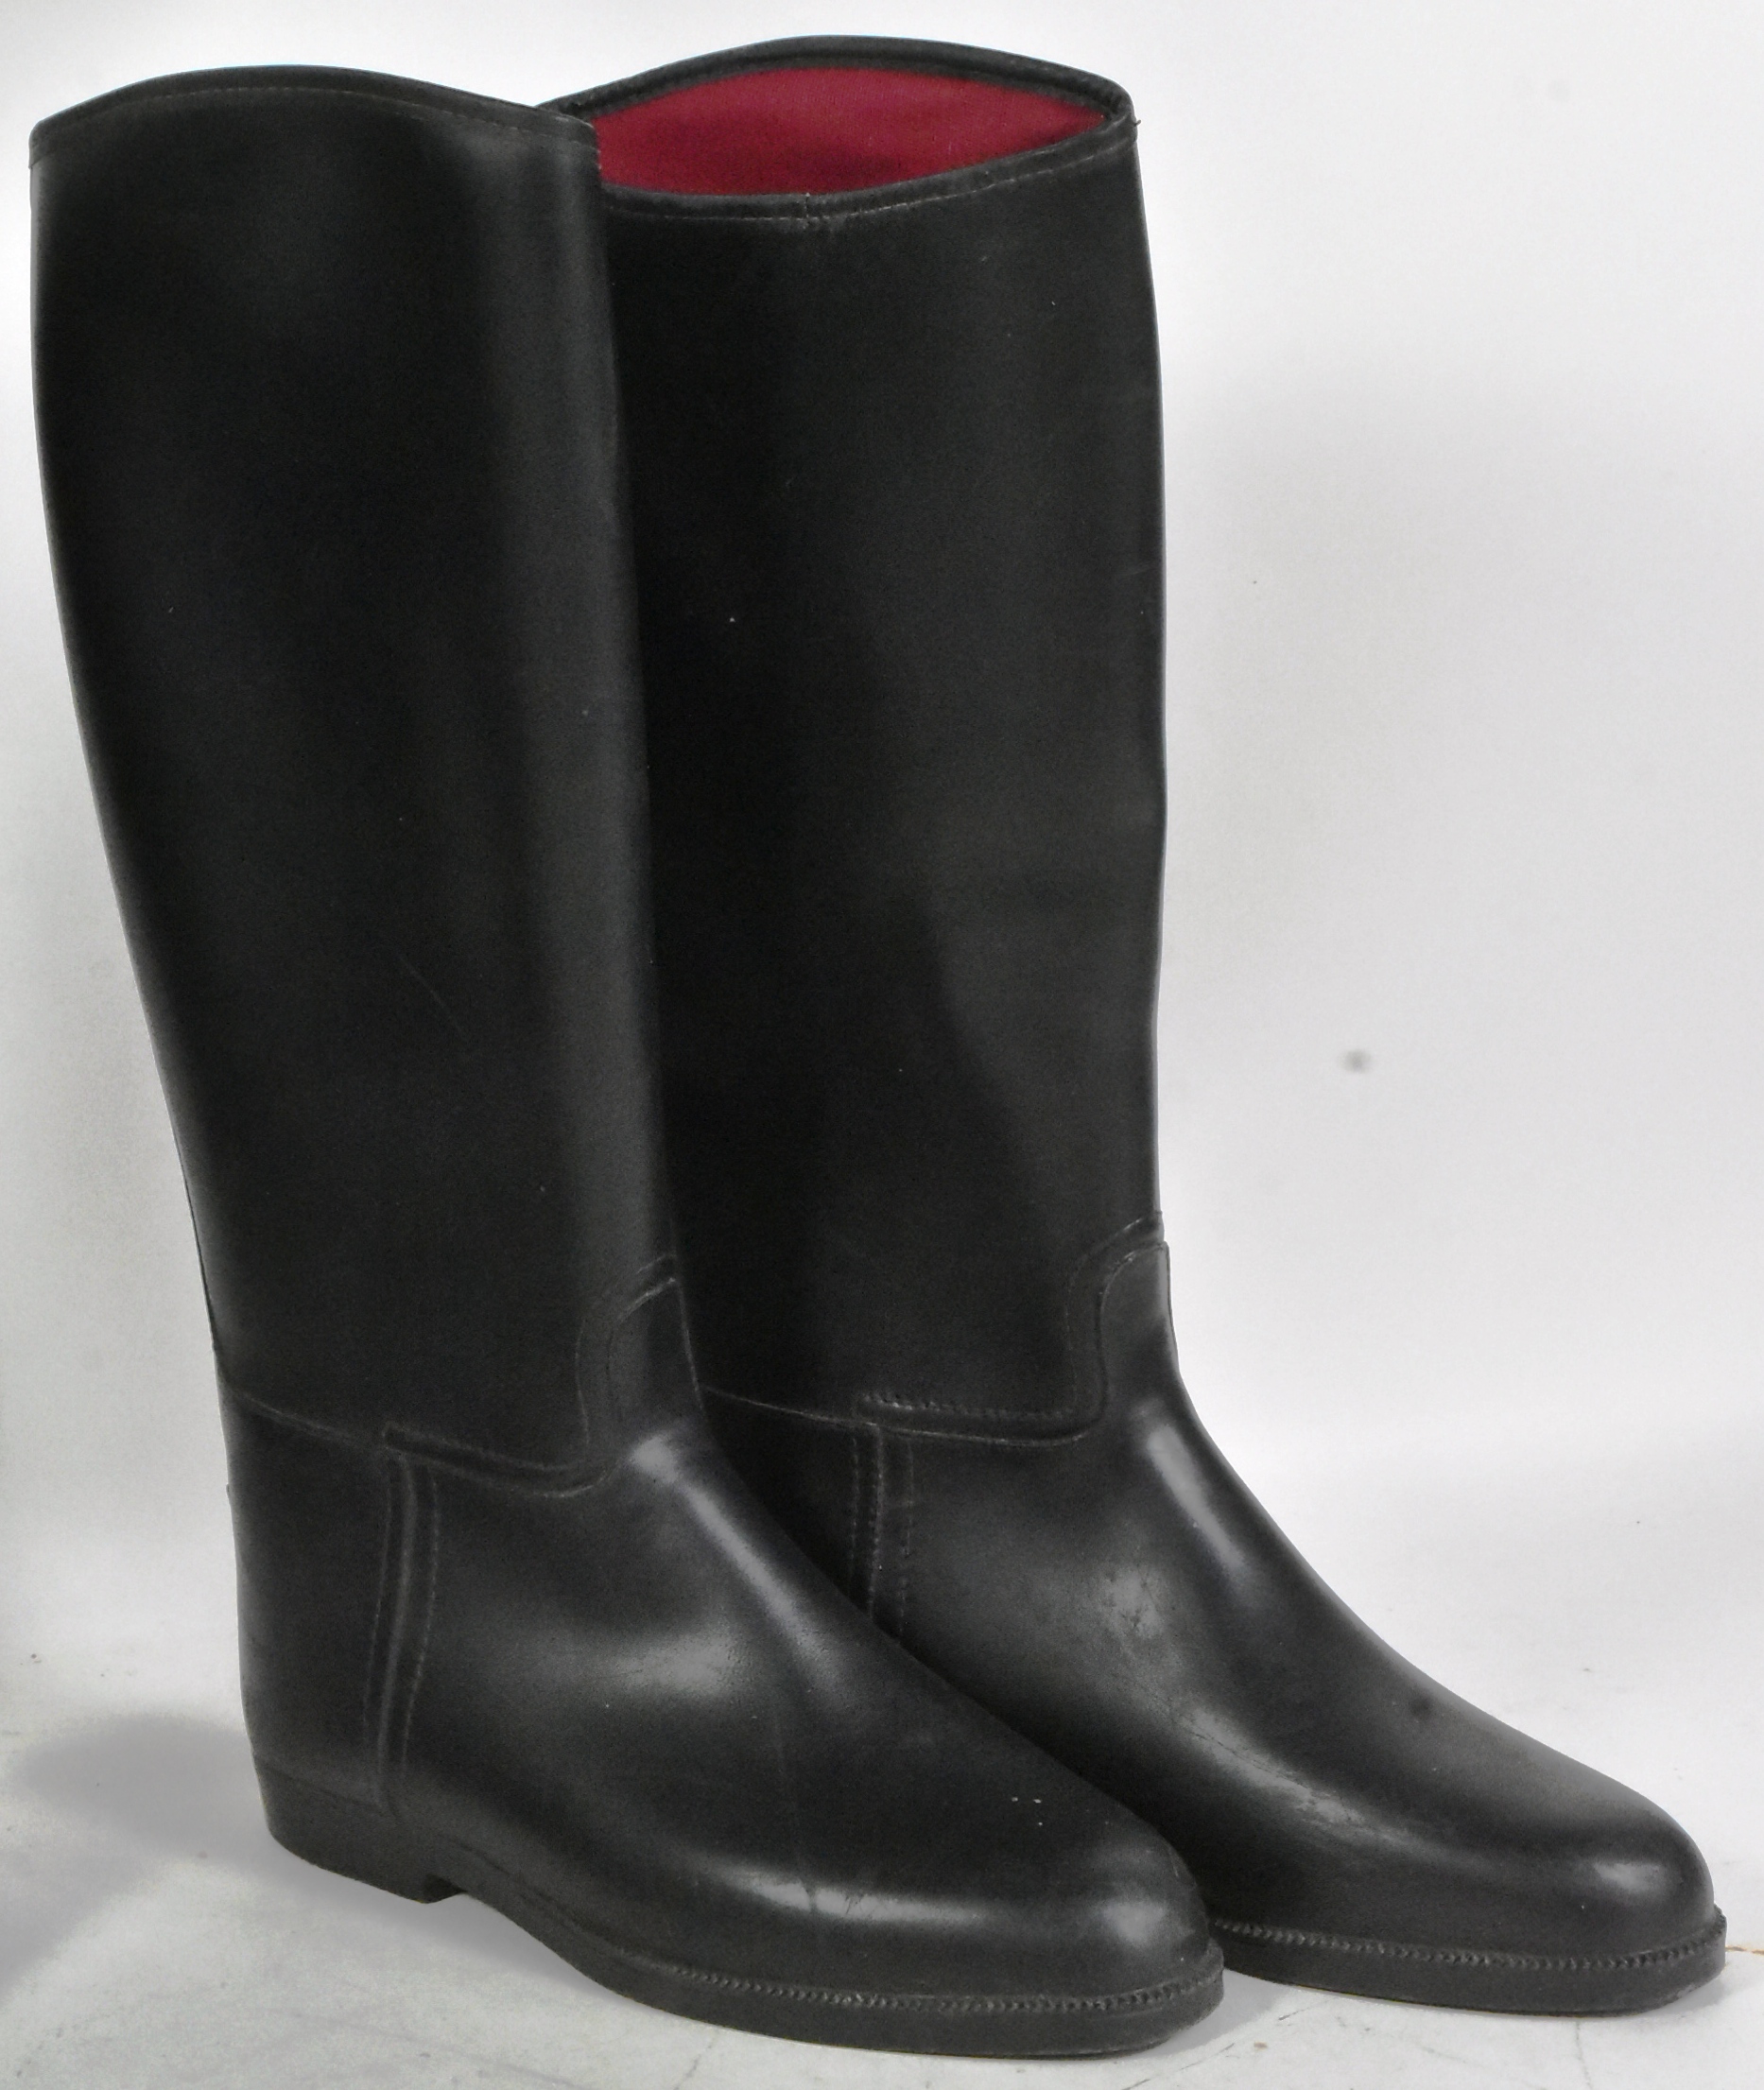 TWO PAIRS OF LADIES HORSE RIDING BOOTS - SIZE UK 7 - Image 2 of 5